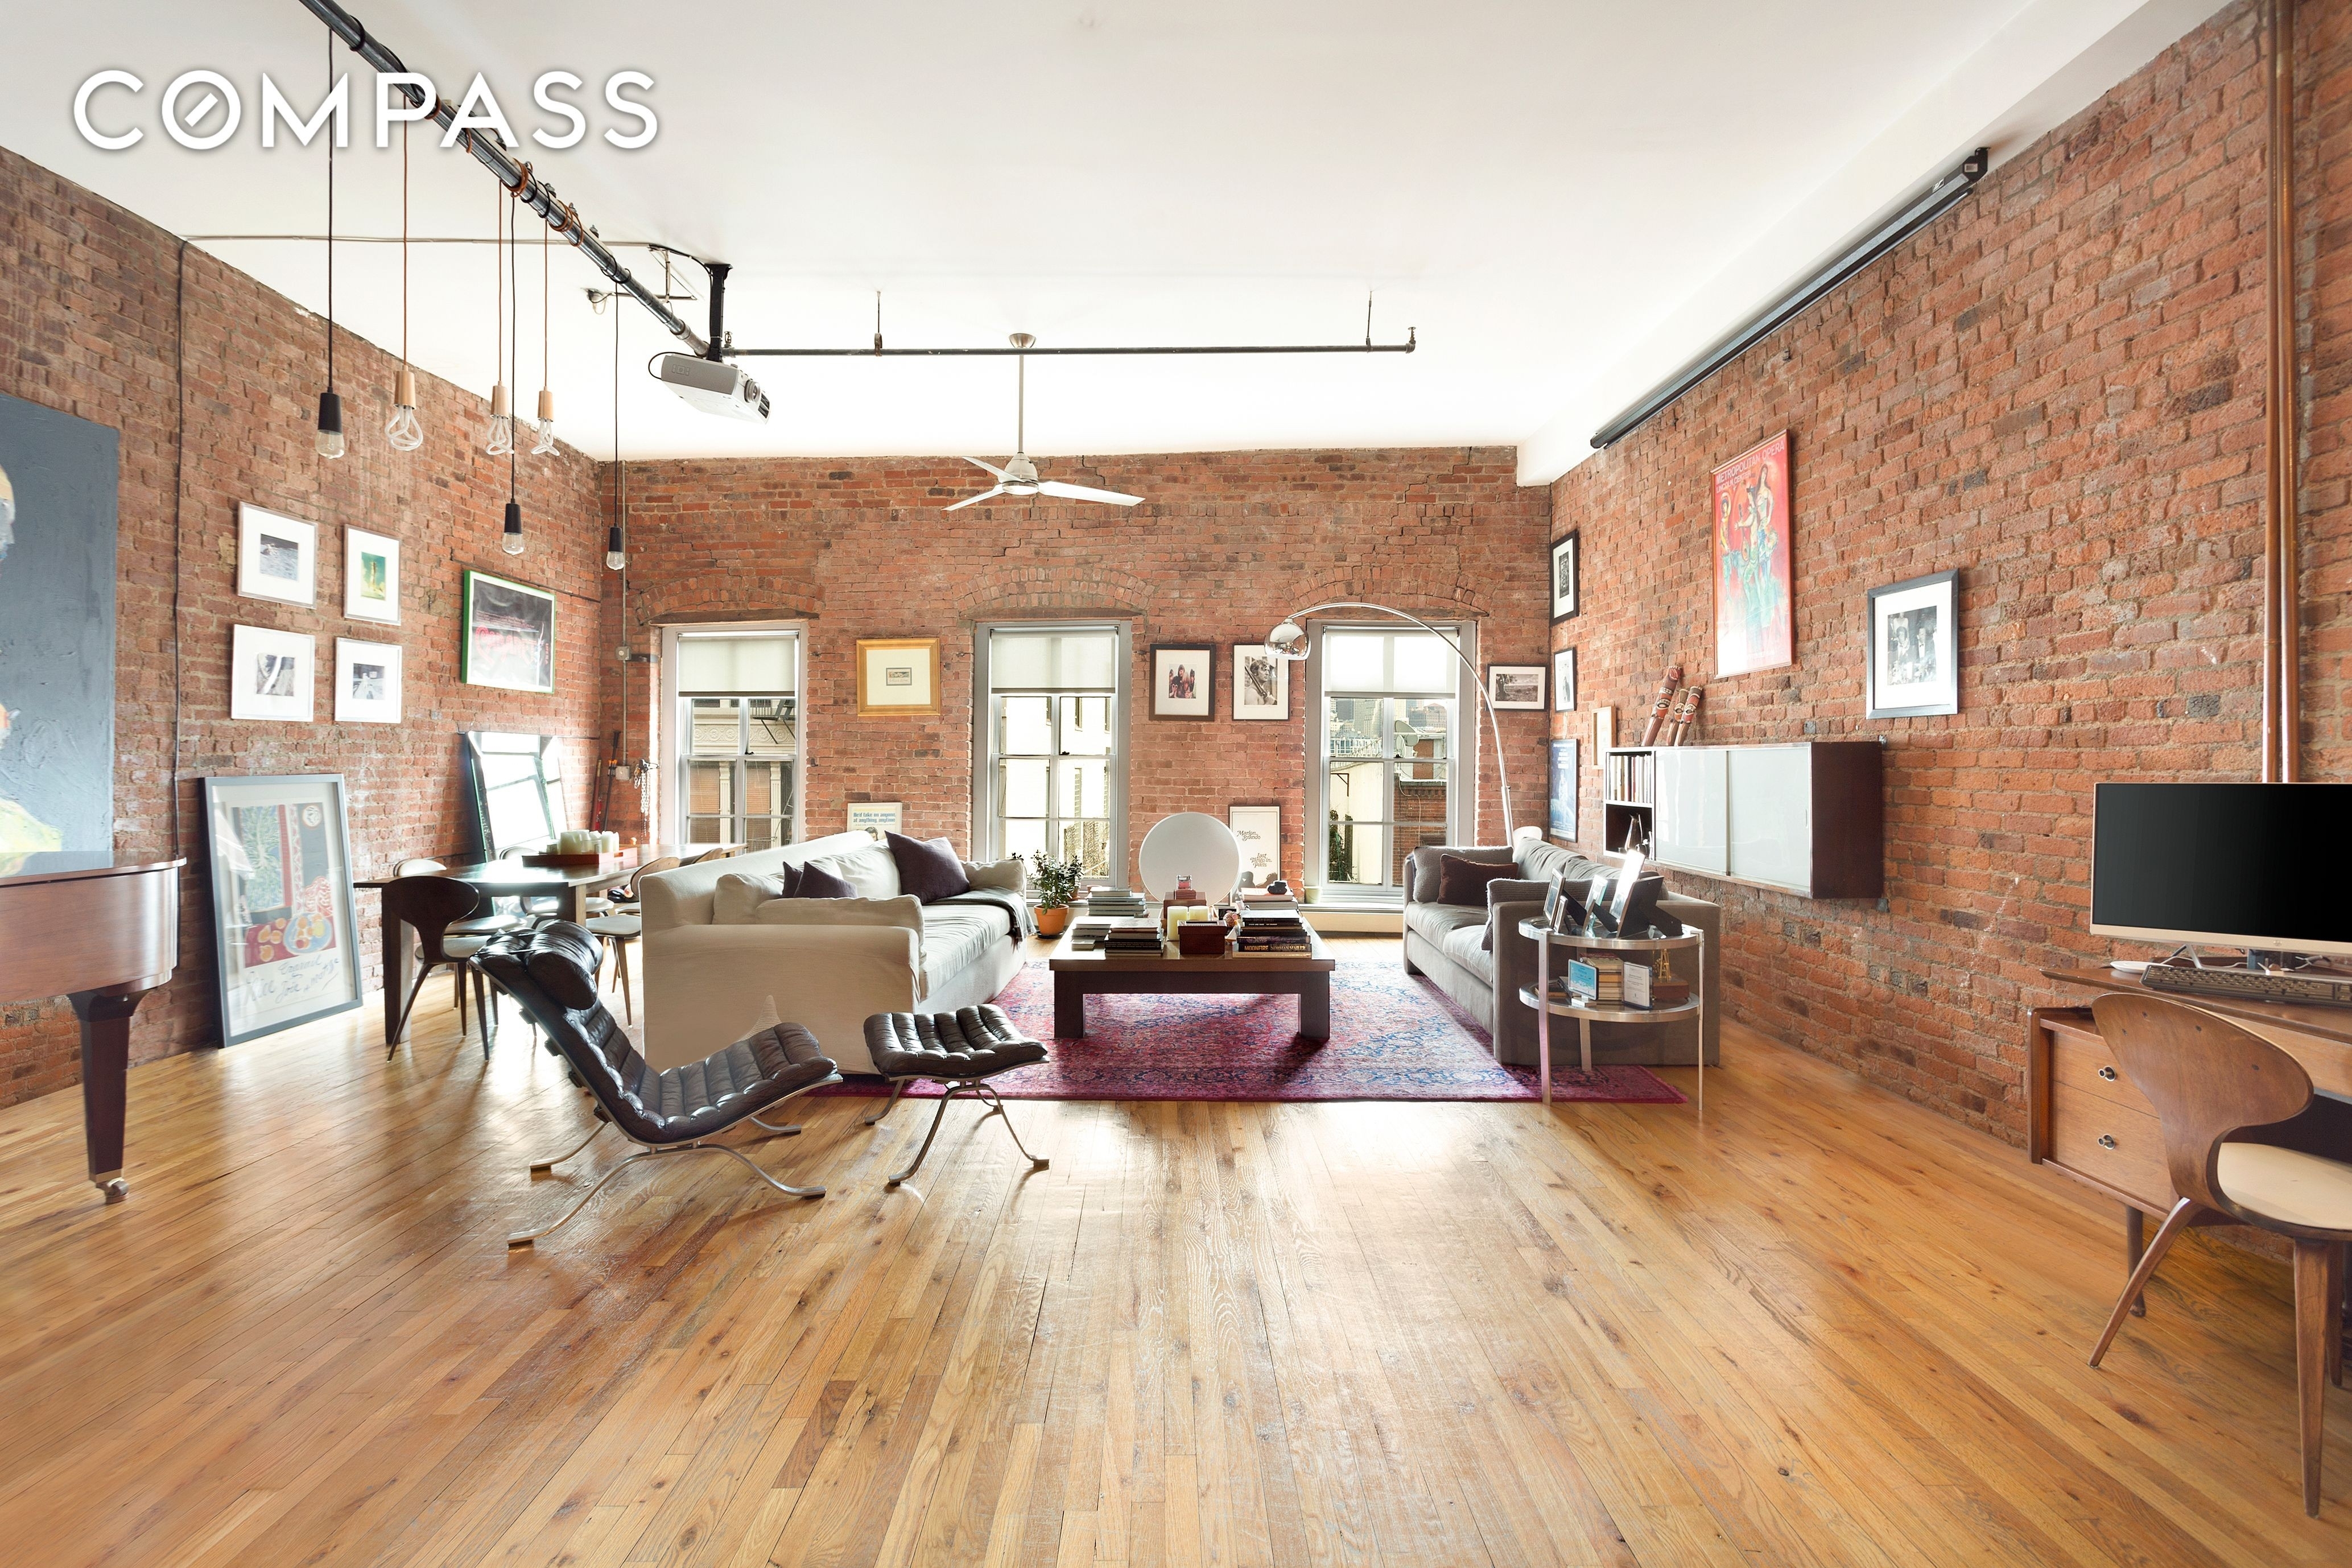 Property at 272 WATER ST, 5F South Street Seaport, New York, New York 10038